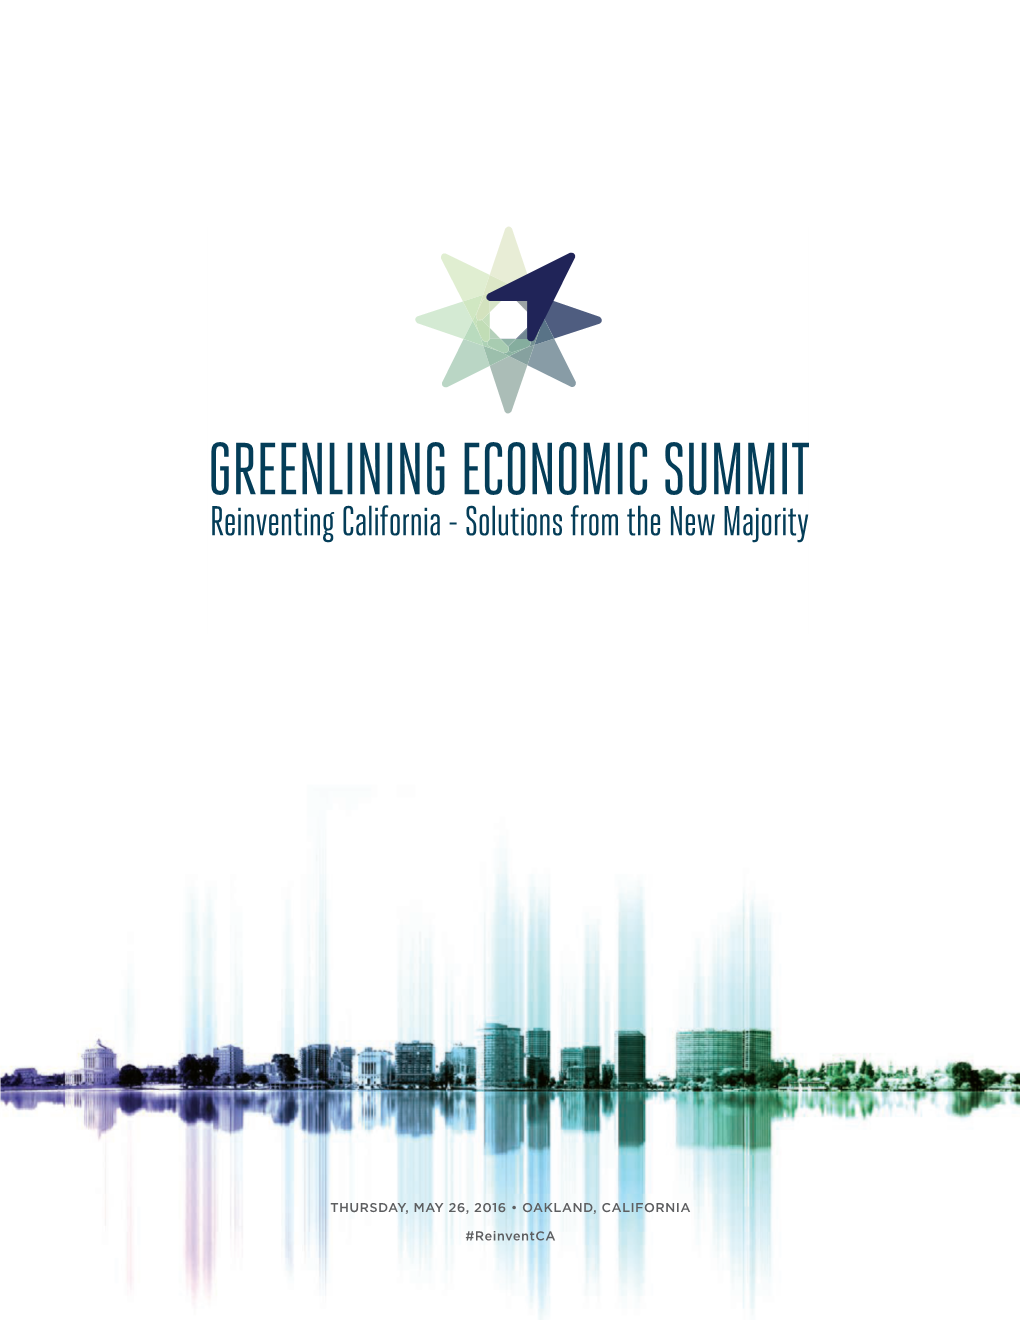 GREENLINING ECONOMIC SUMMIT Reinventing California - Solutions from the New Majority